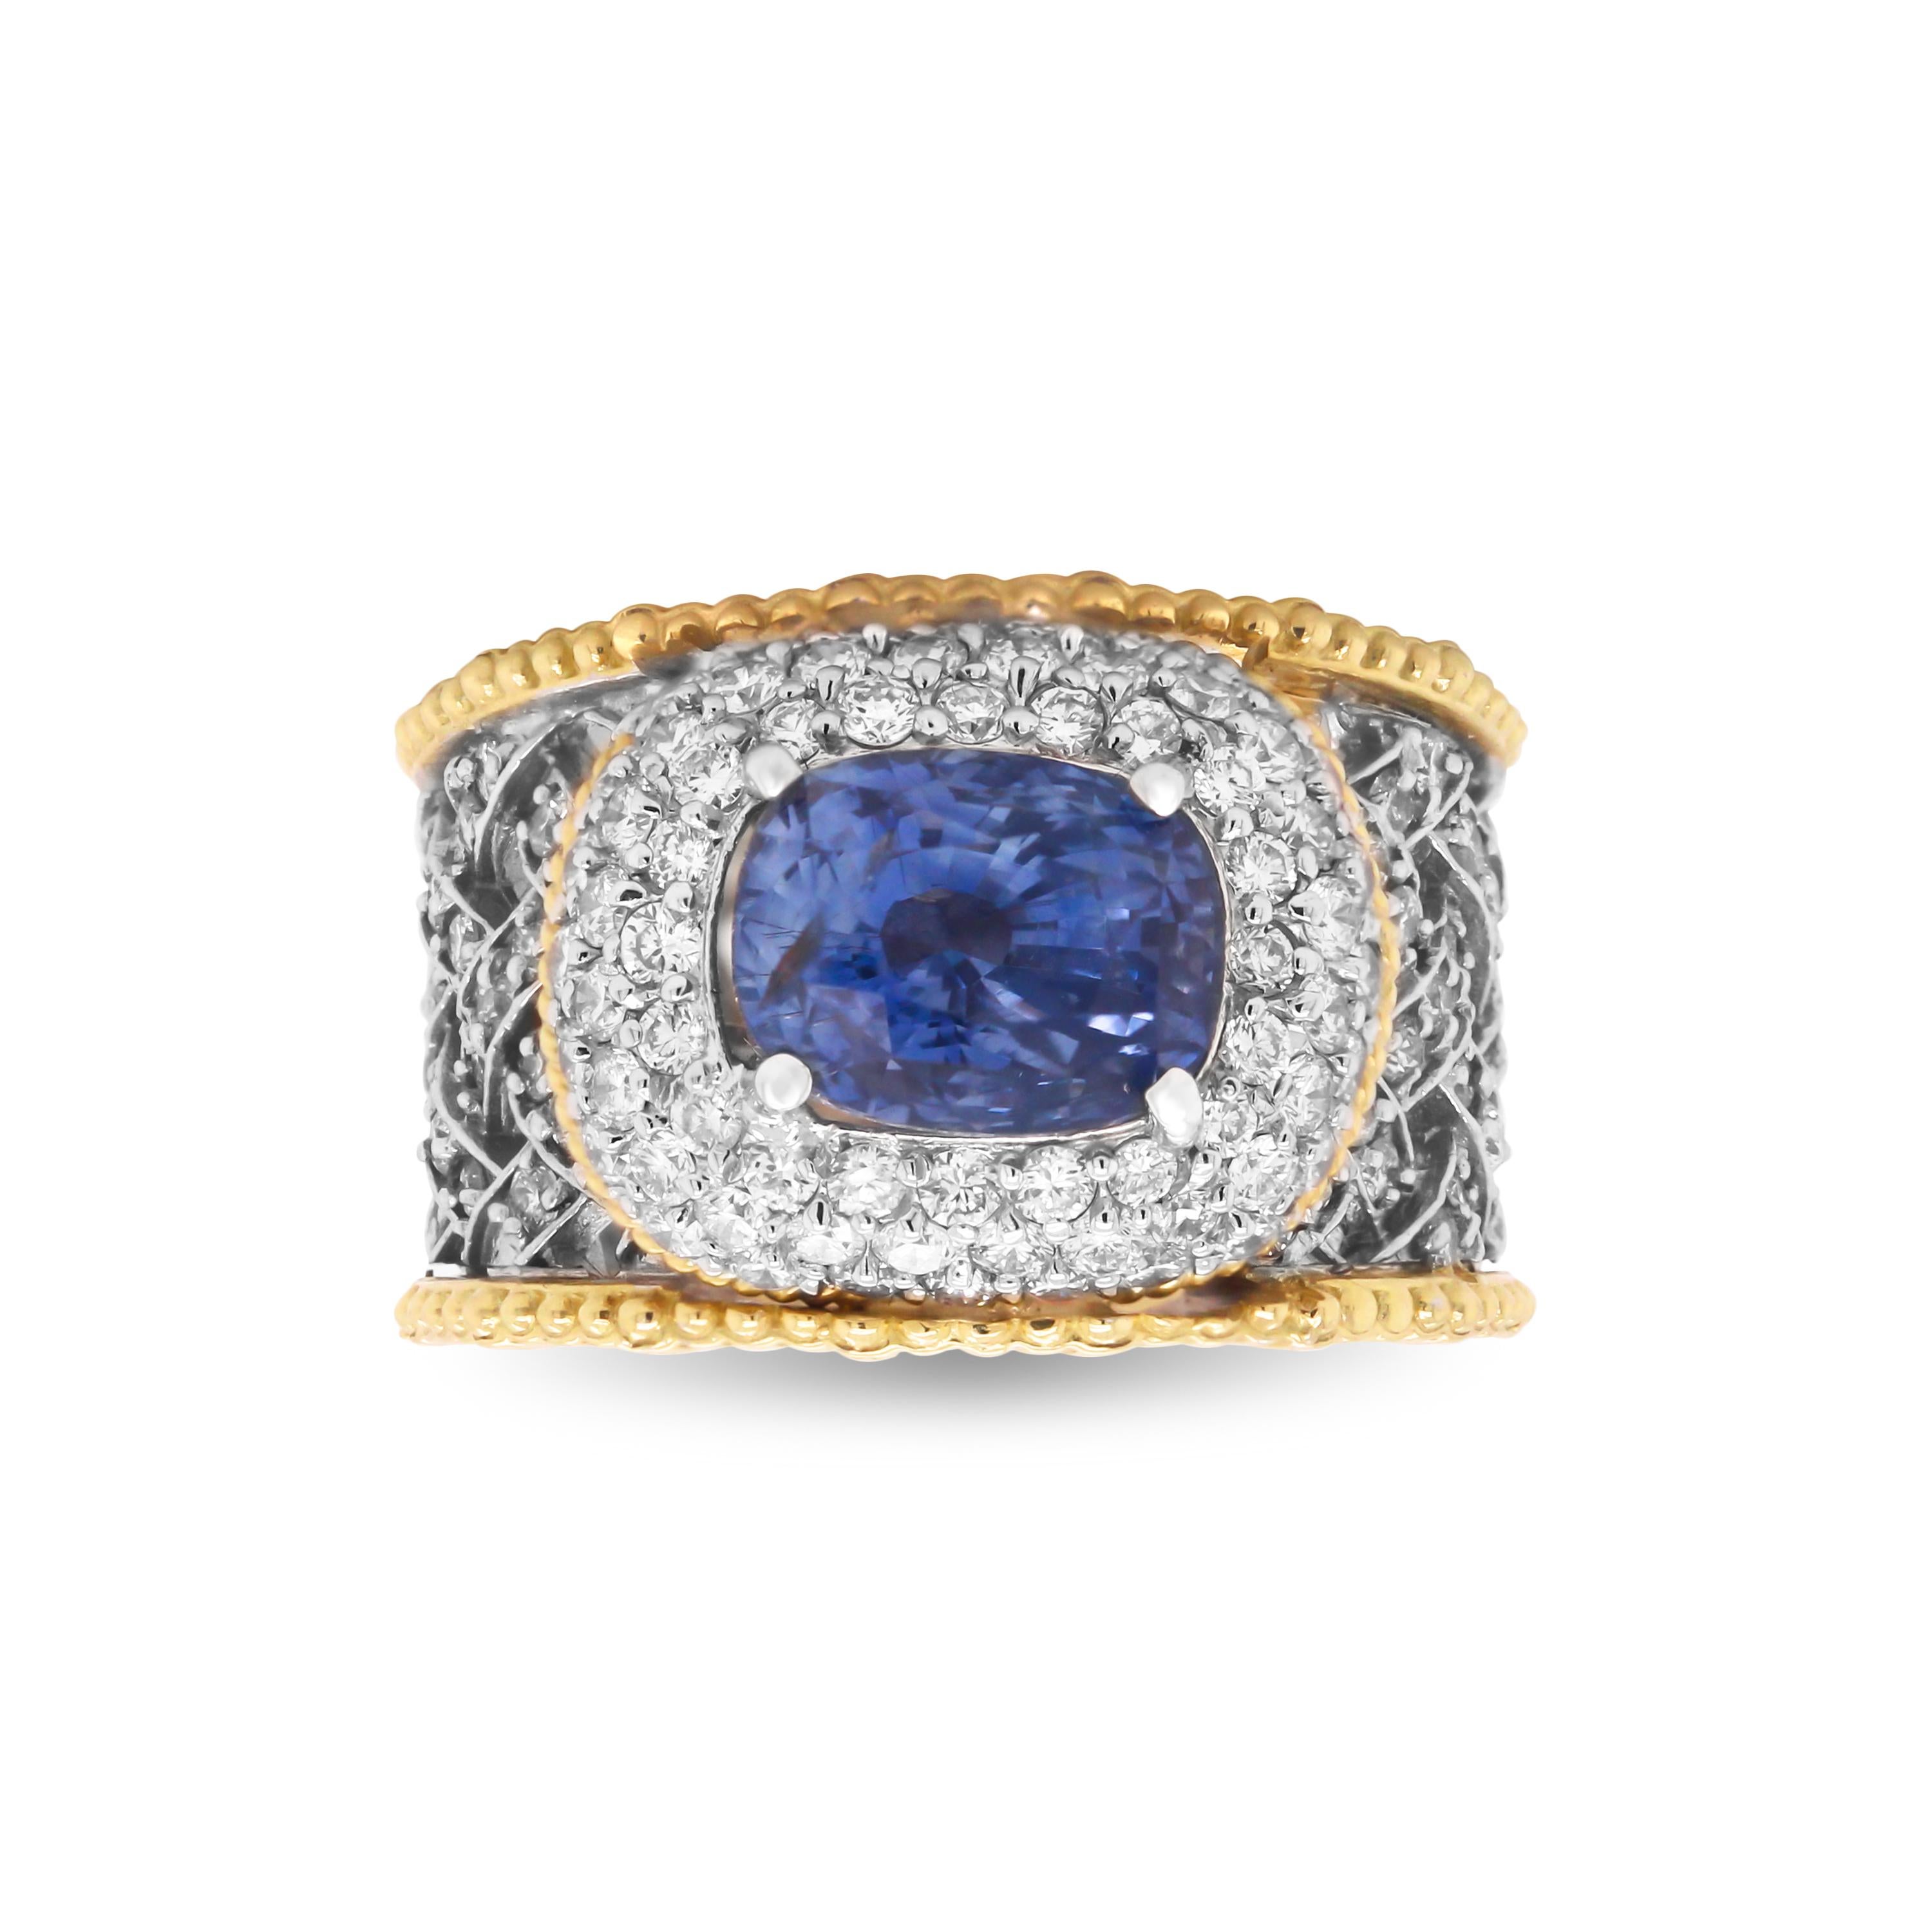 18k Two-Tone Yellow and White Gold Ring with Diamonds and Oval No Heat Blue Sapphire Center by Stambolian

This one-of-a-kind ring by Stambolian features a remarkable design with inspirations from Architectural influence. 

1.82 carat G color, VS